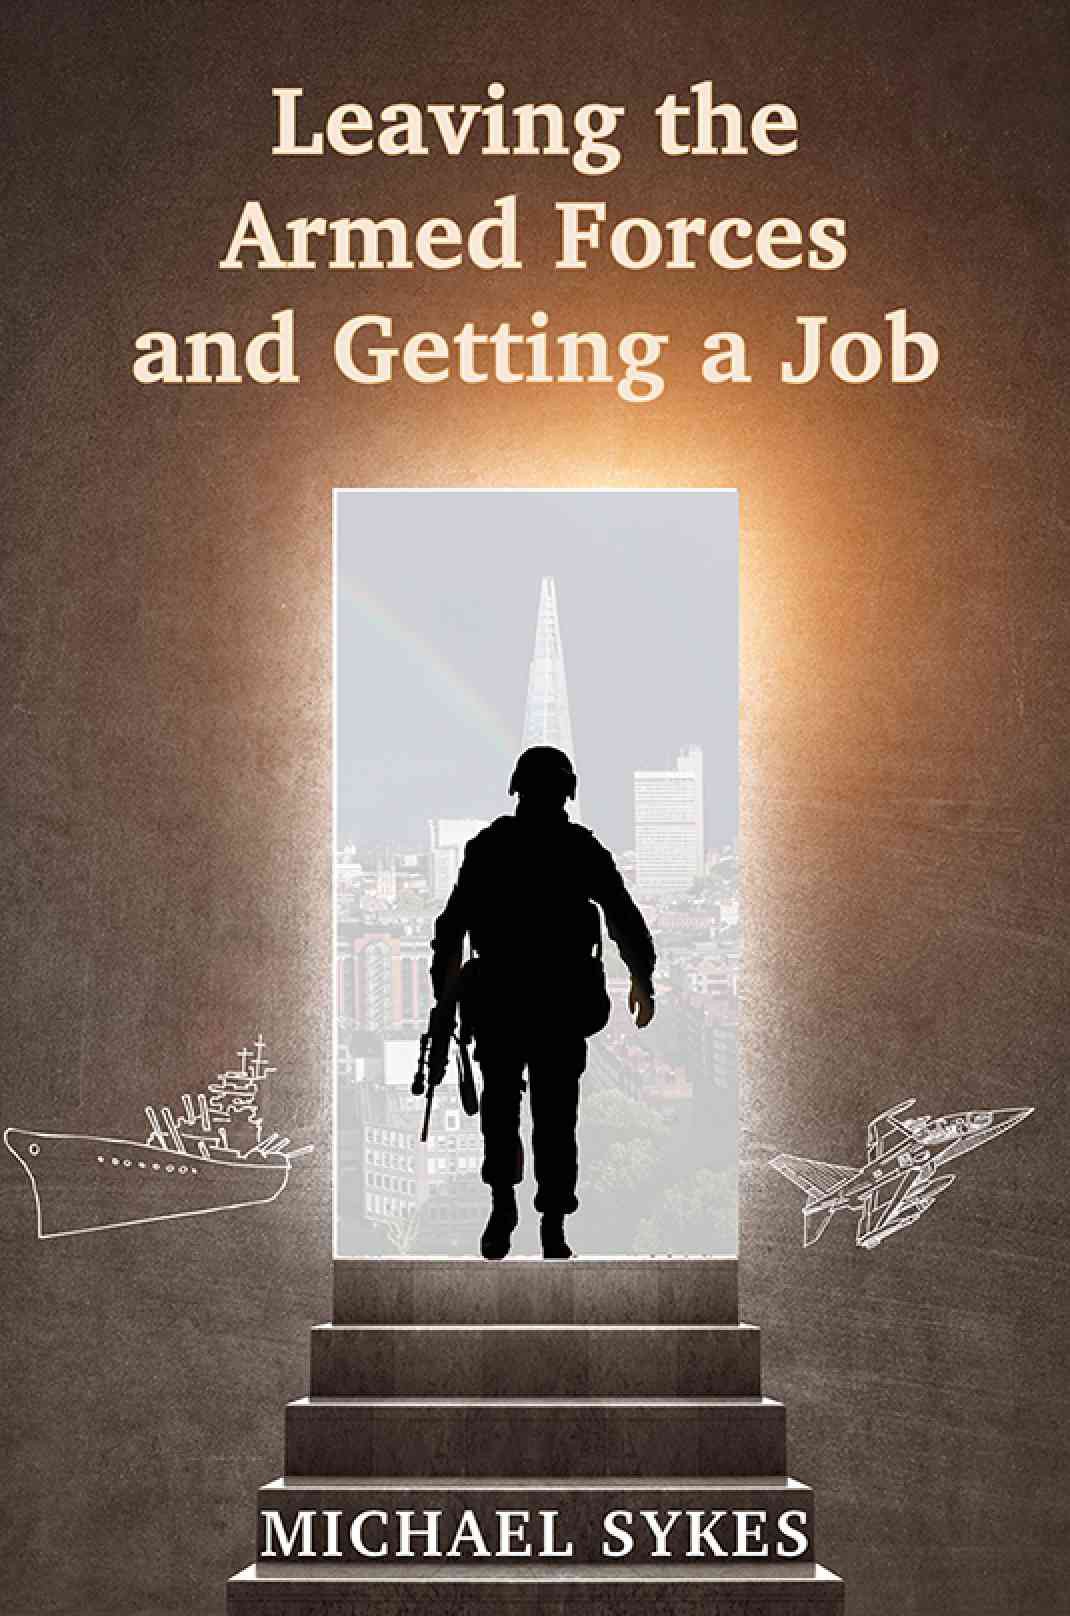 Michael Sykes’ Leaving the Armed Forces and Getting a Job Got Featured on Boove.co.uk